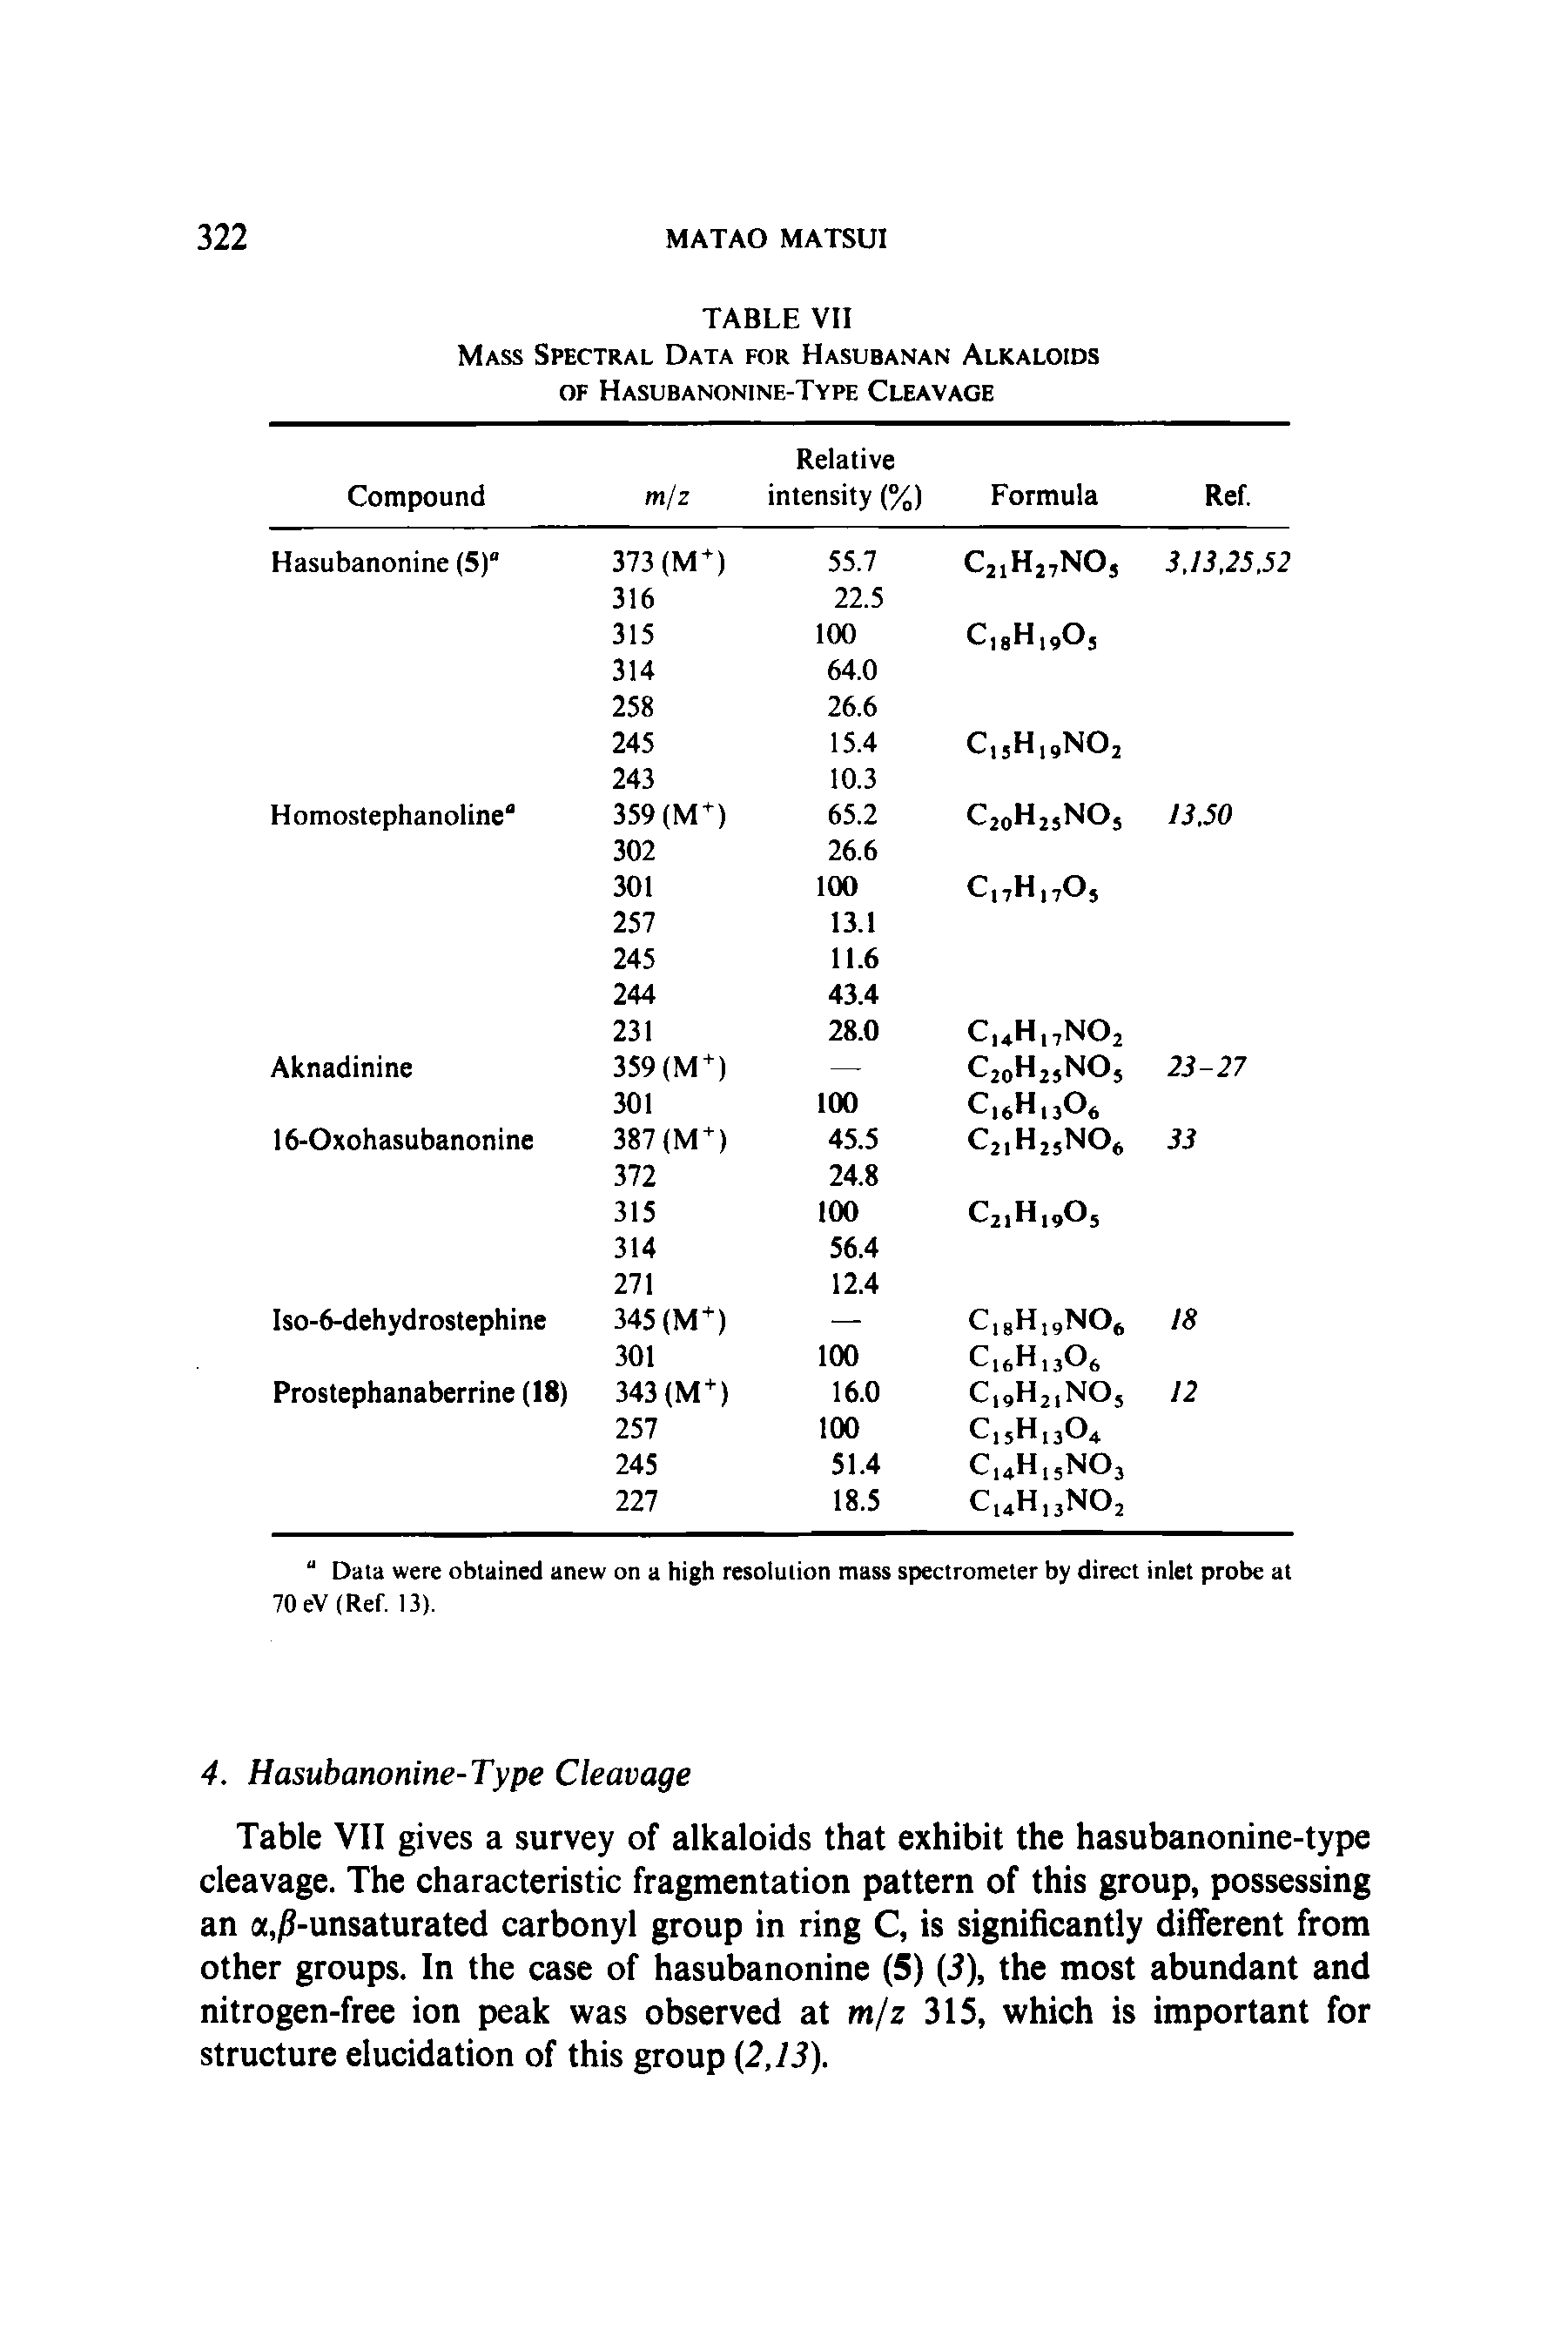 Table VII gives a survey of alkaloids that exhibit the hasubanonine-type cleavage. The characteristic fragmentation pattern of this group, possessing an a,/ -unsaturated carbonyl group in ring C, is significantly different from other groups. In the case of hasubanonine (5) (3), the most abundant and nitrogen-free ion peak was observed at m/z 315, which is important for structure elucidation of this group (2,73).